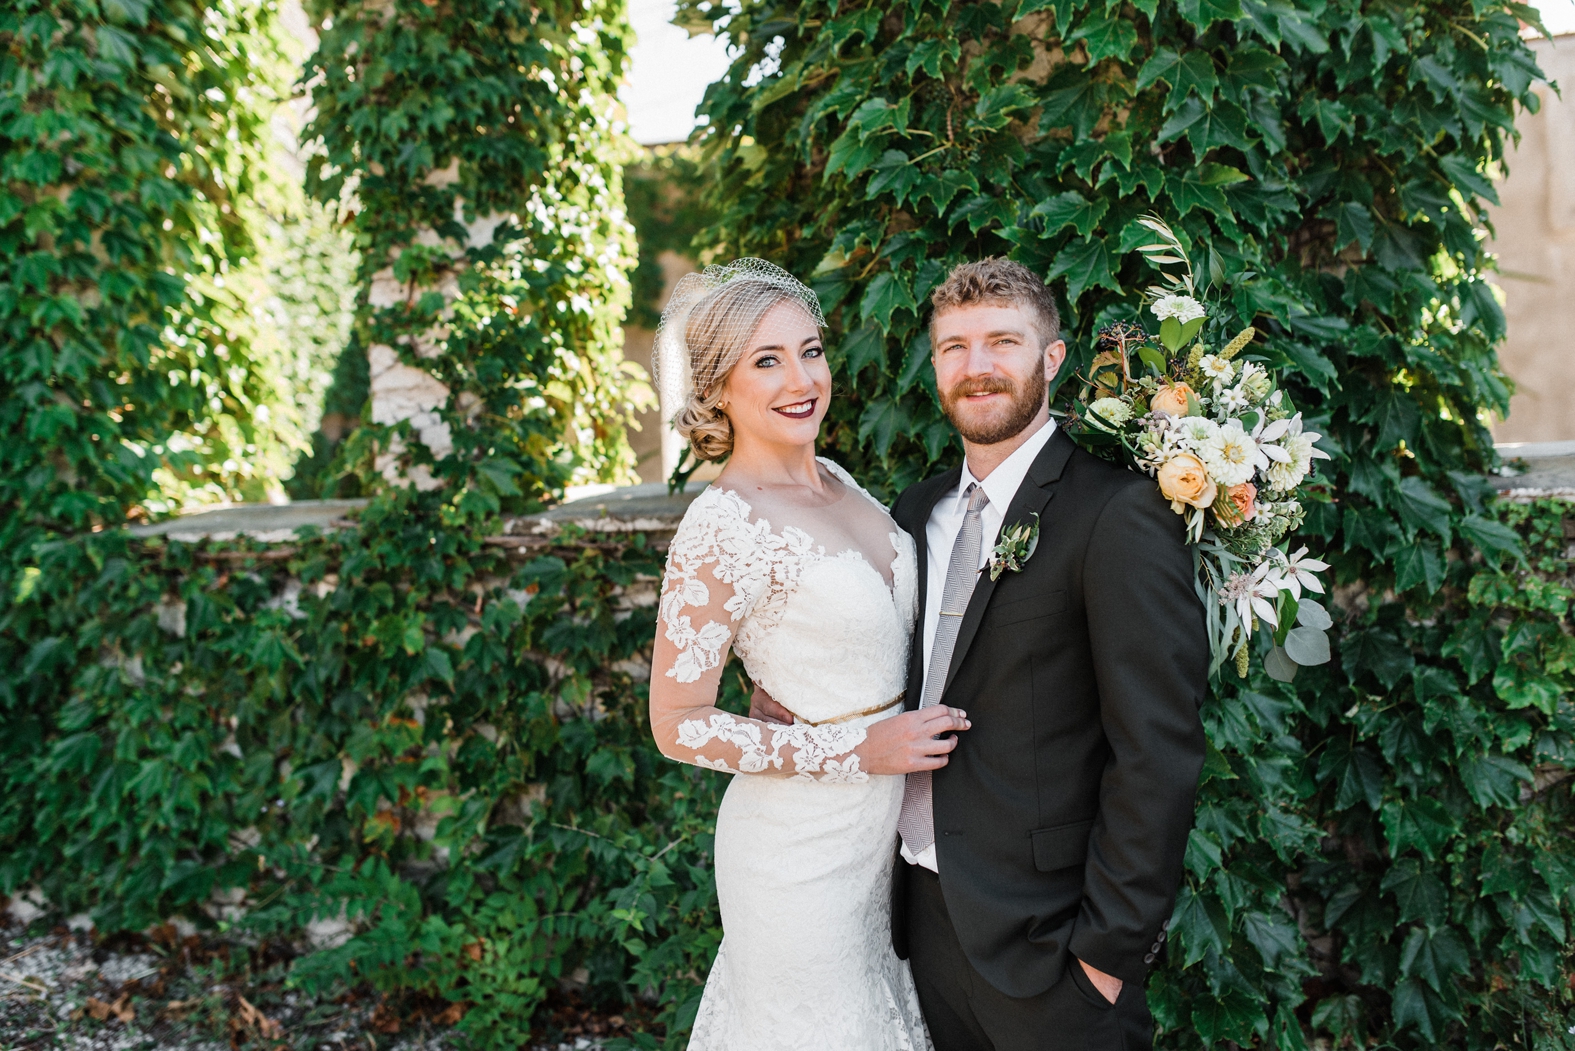 Bride in lace overlay dress with long sleeves, gold belt, birdcage veil. Groom in olive green suit with silver tie, greenery boutonniere. Bridal bouquet with peach ivory and greenery.